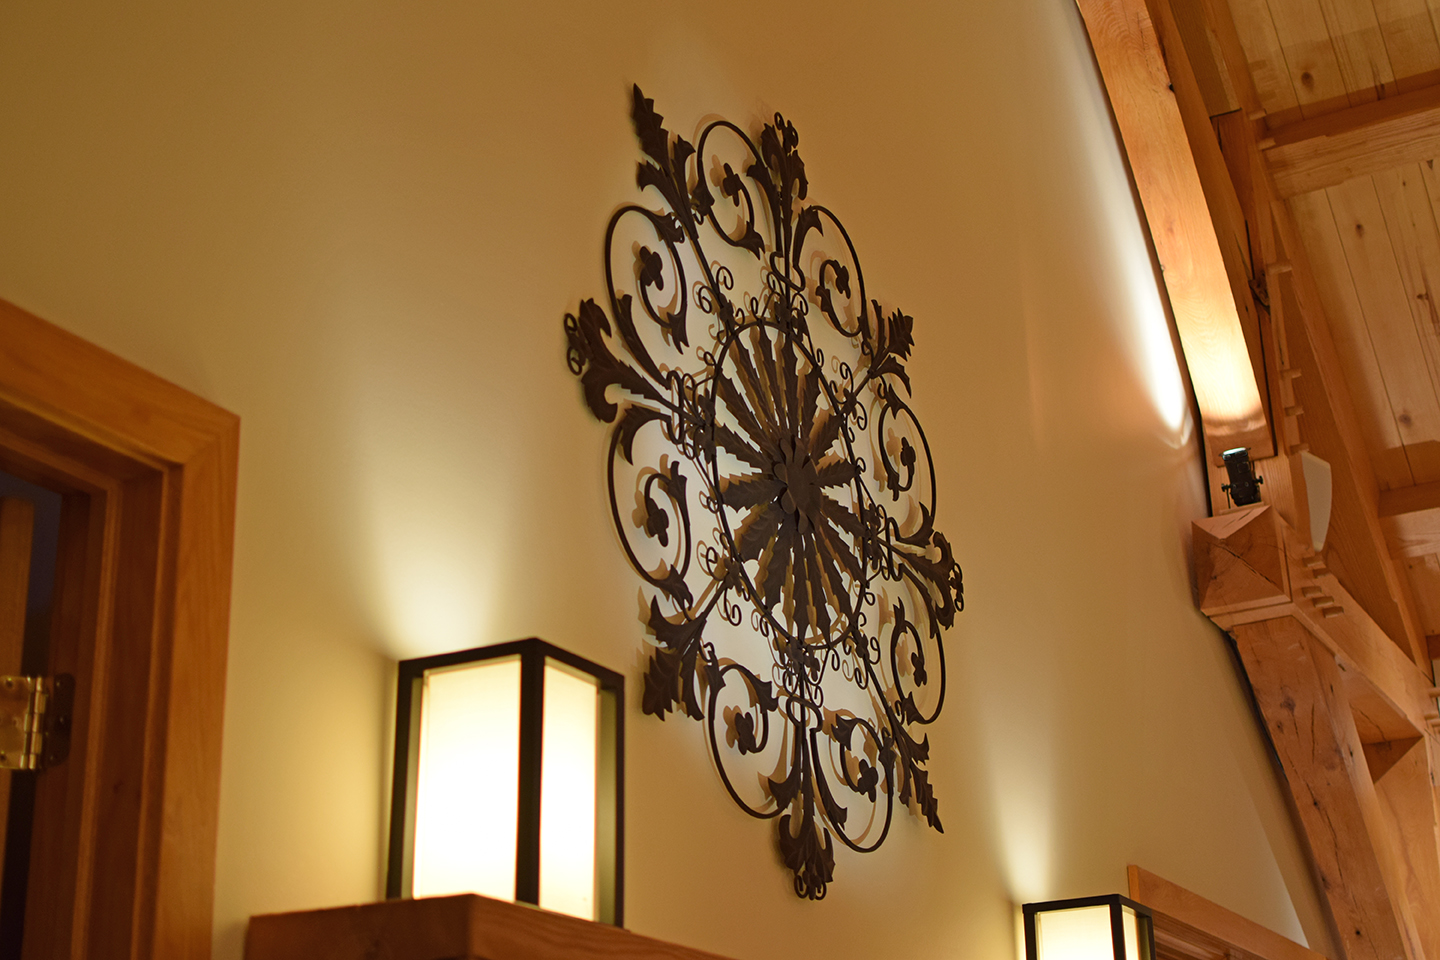 A wall in a home with a large, ornate, flat metal sculpture on the wall with two lamps below on either side.